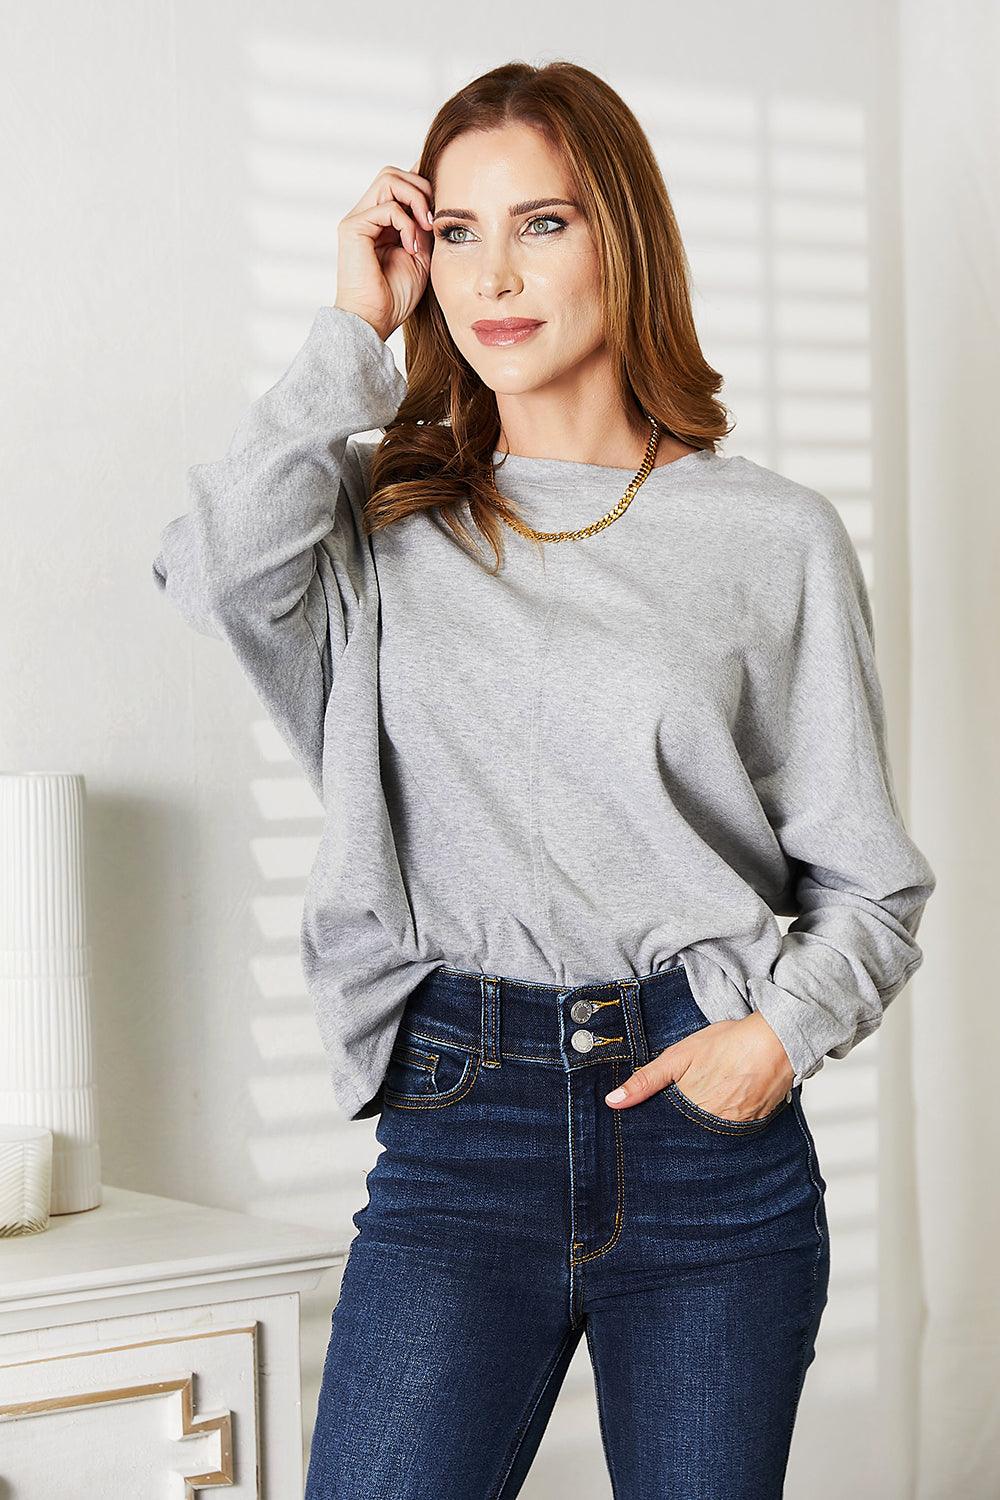 Double Take Seam Detail Round Neck Long Sleeve Top - Lab Fashion, Home & Health